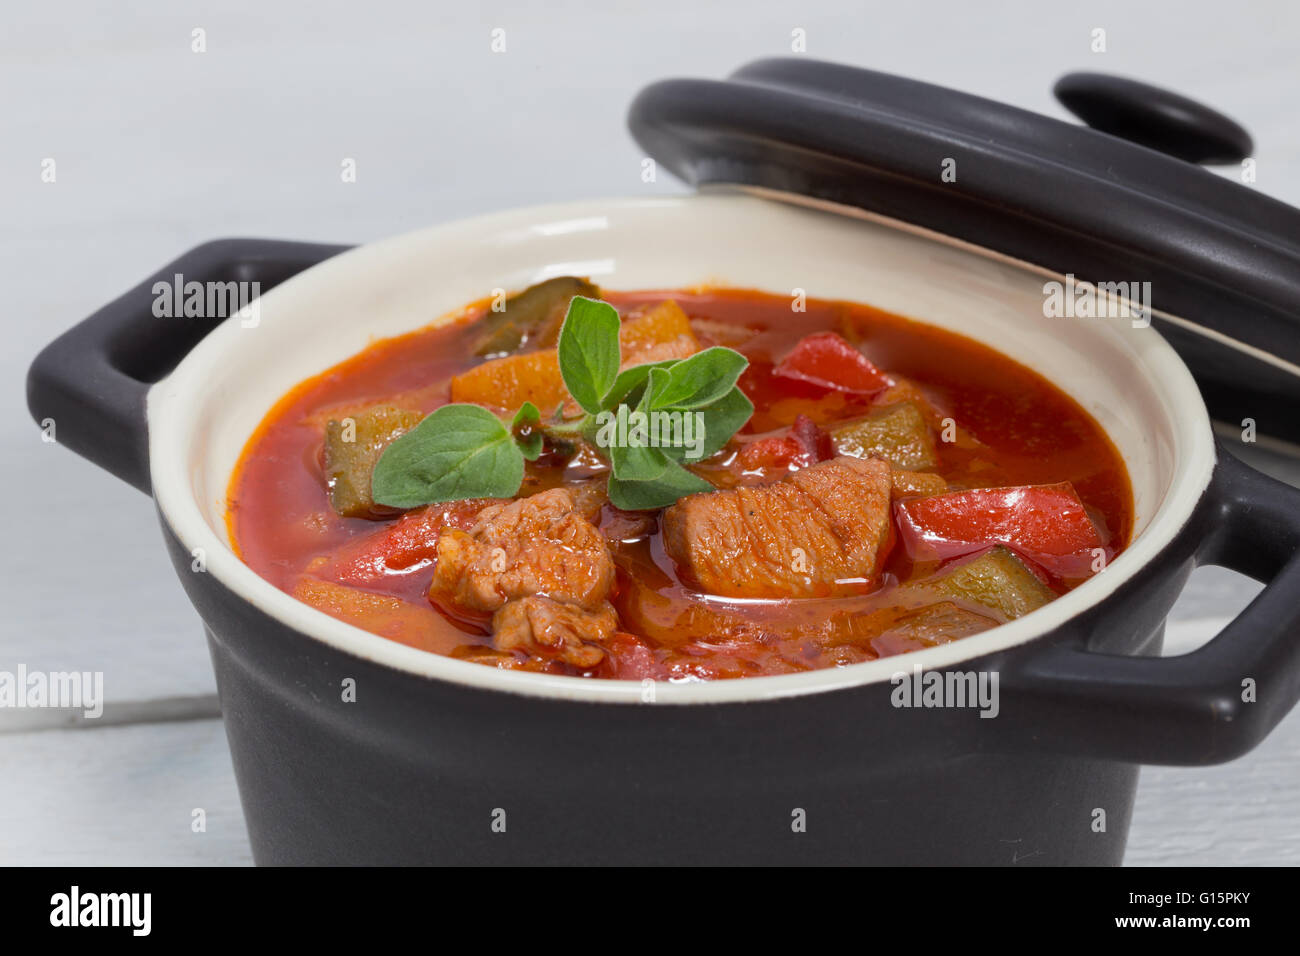 Goulash in a black cocotte with marjoram on white wood. Stock Photo